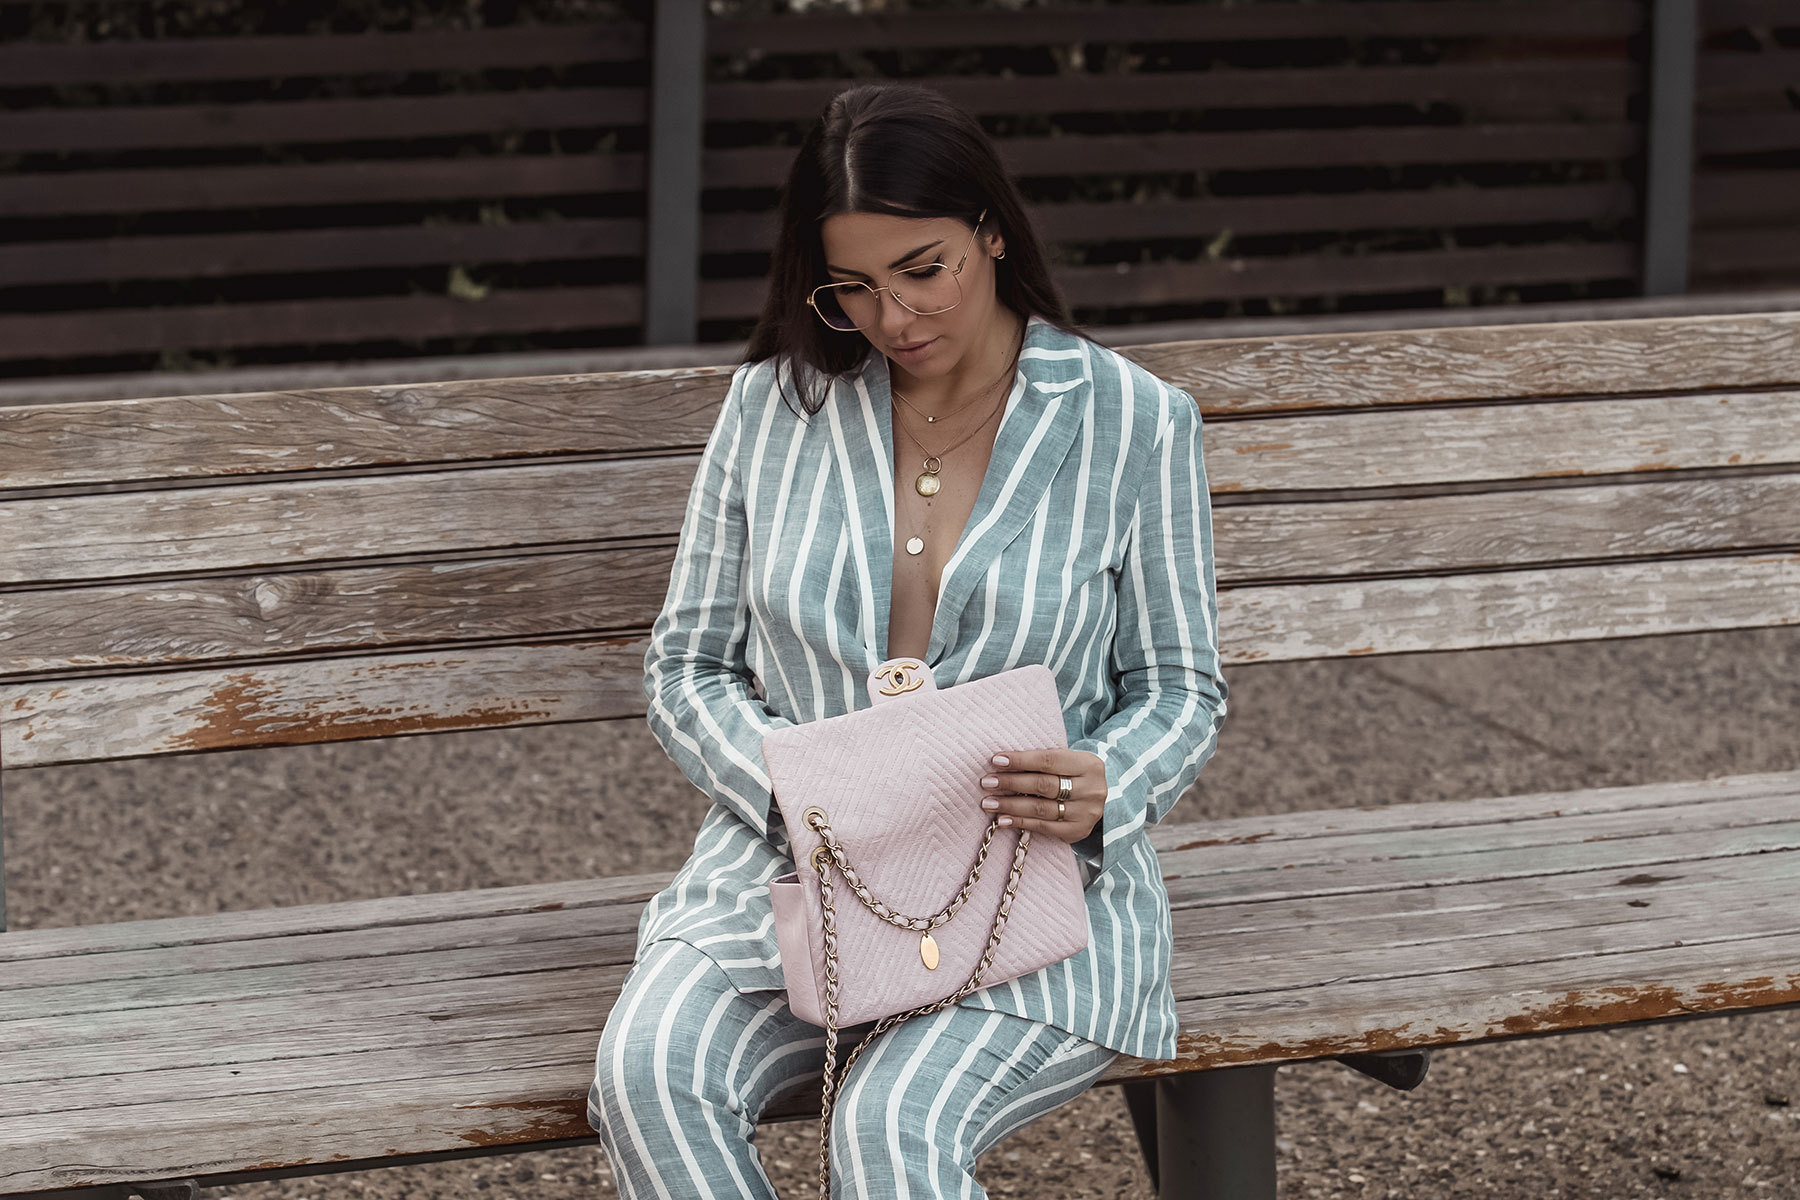 Stella Asteria wearing striped suit and pink Chanel chevron bag